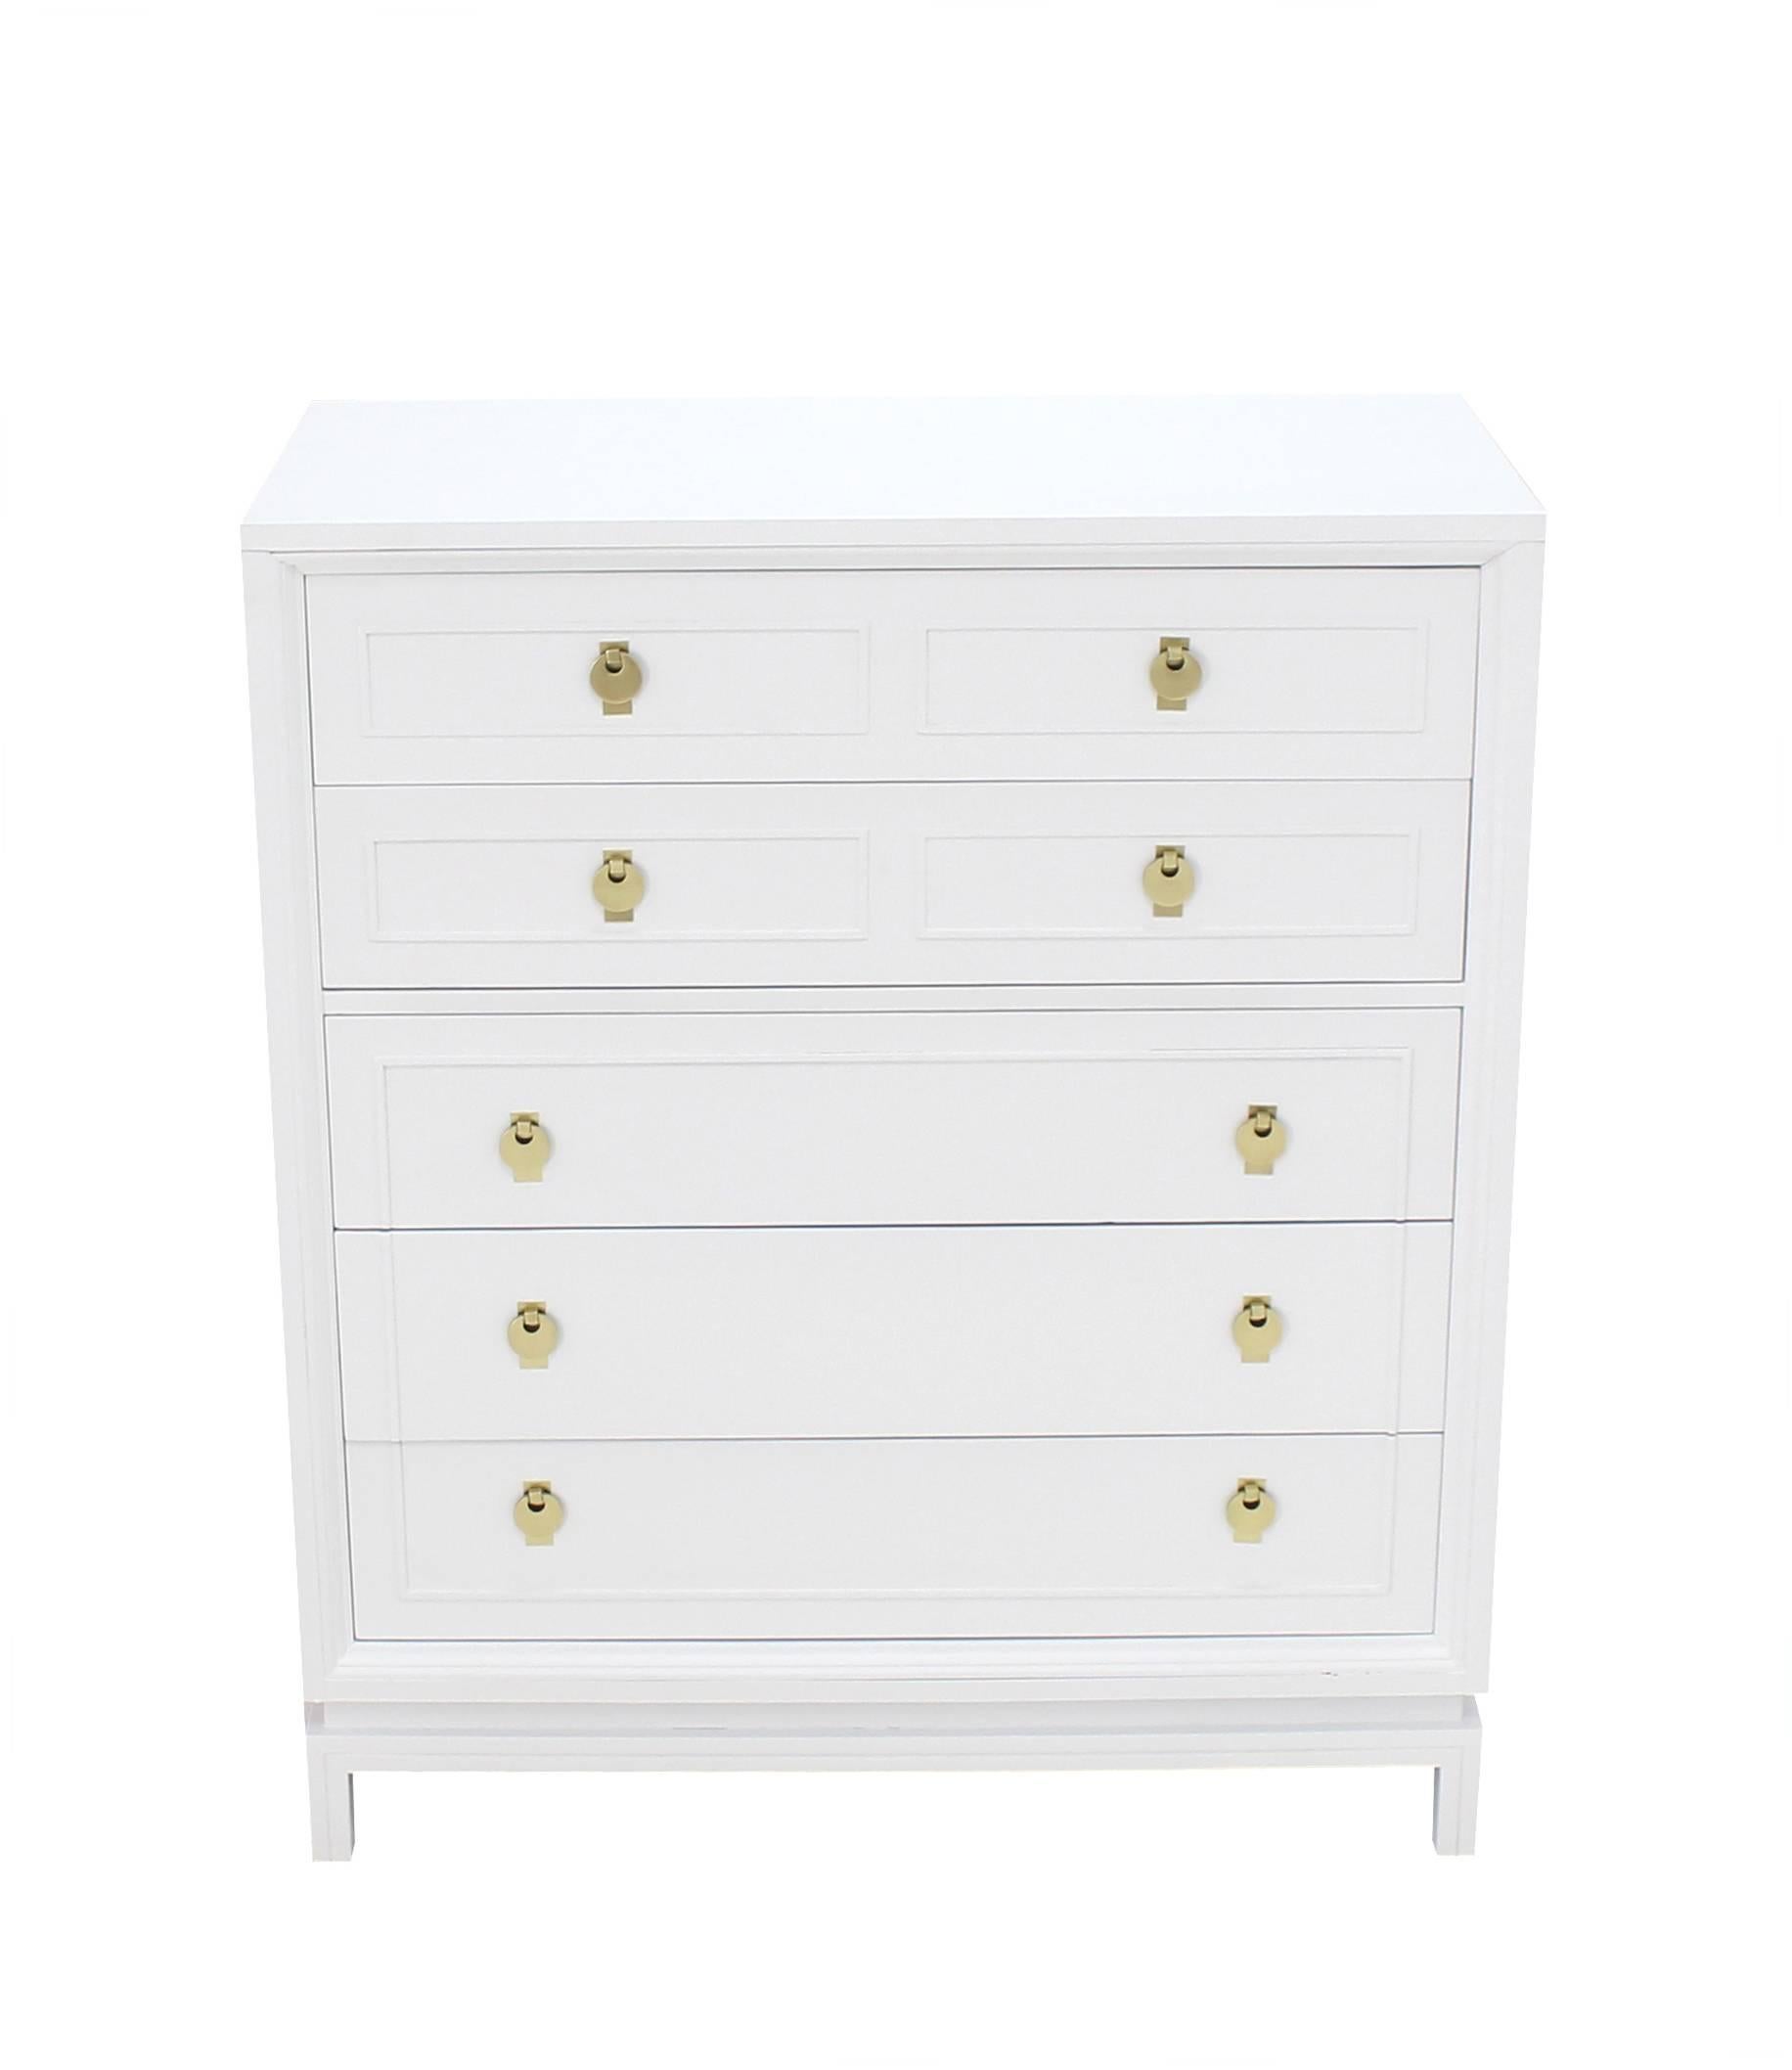 Nice Mid-Century modern white lacquer high chest dresser with brass pulls.